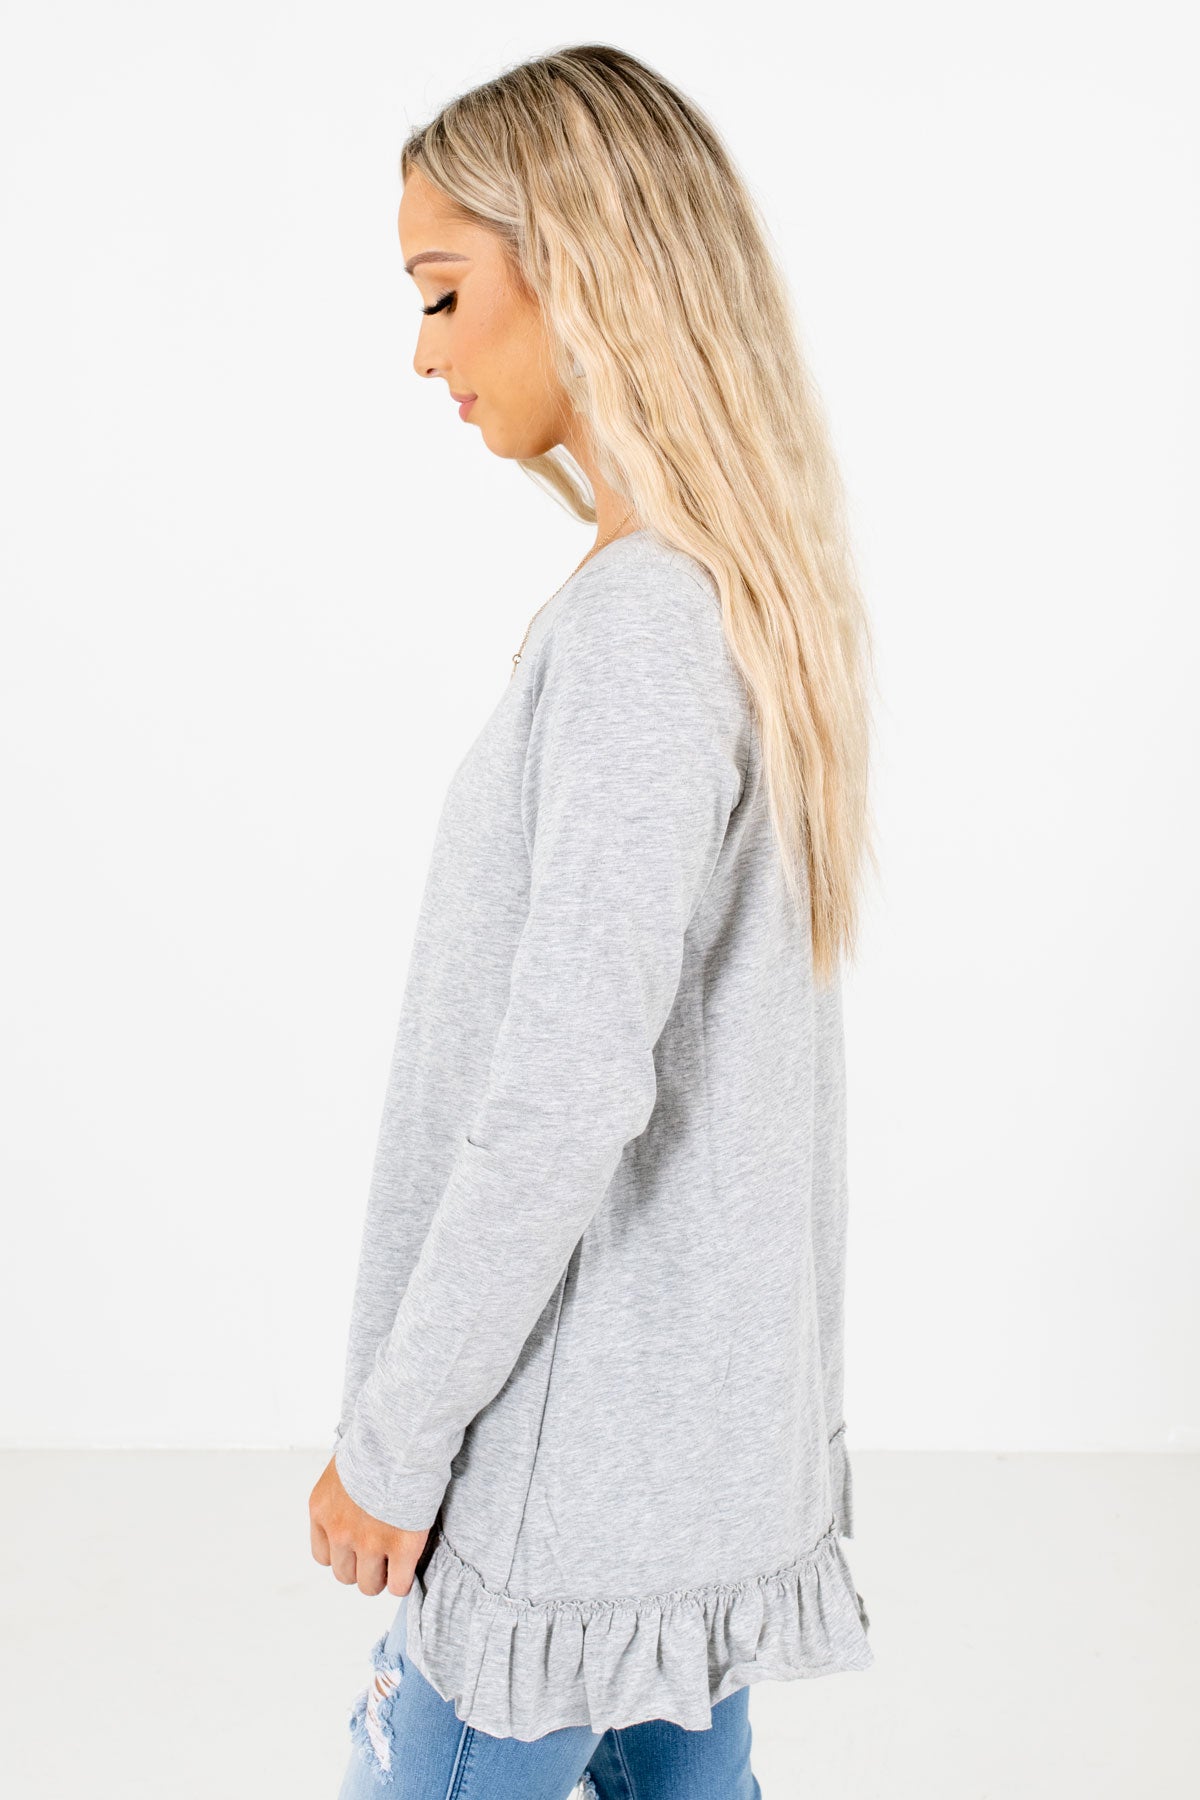 Women's Heather Gray High-Quality Lightweight Boutique Tops